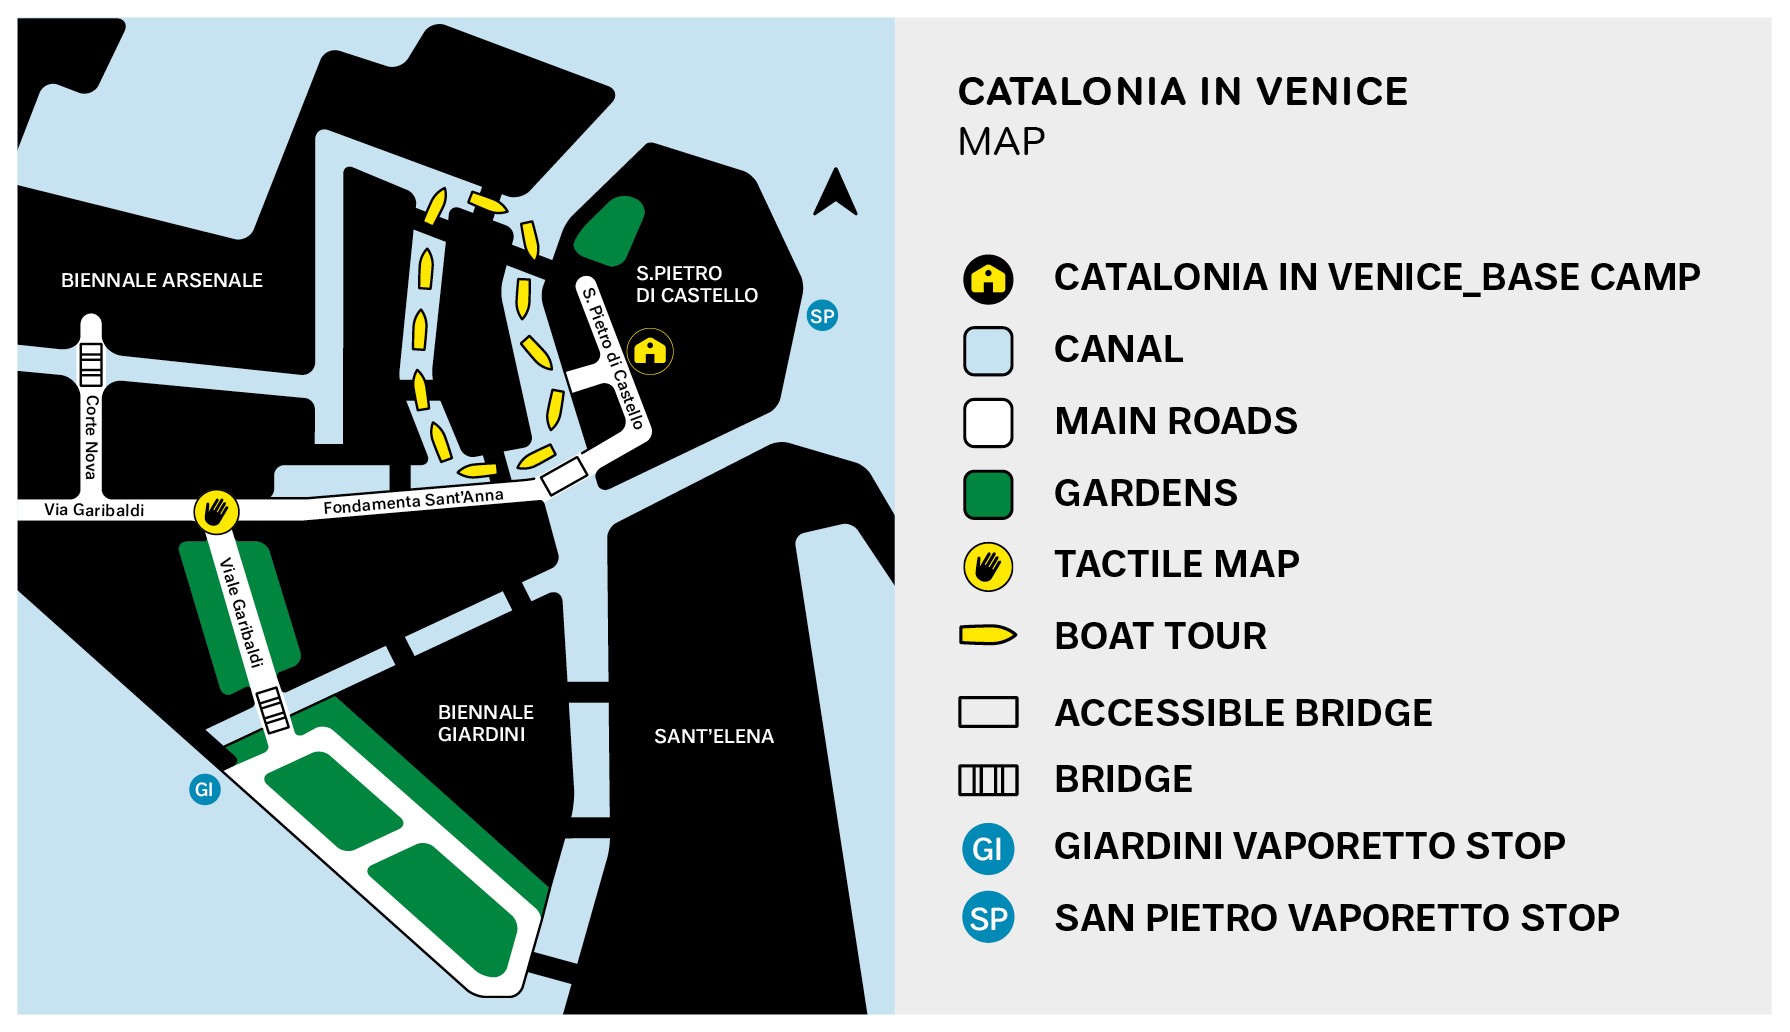 Access map to the base camp. The base camp is next to San Pietro di Castello